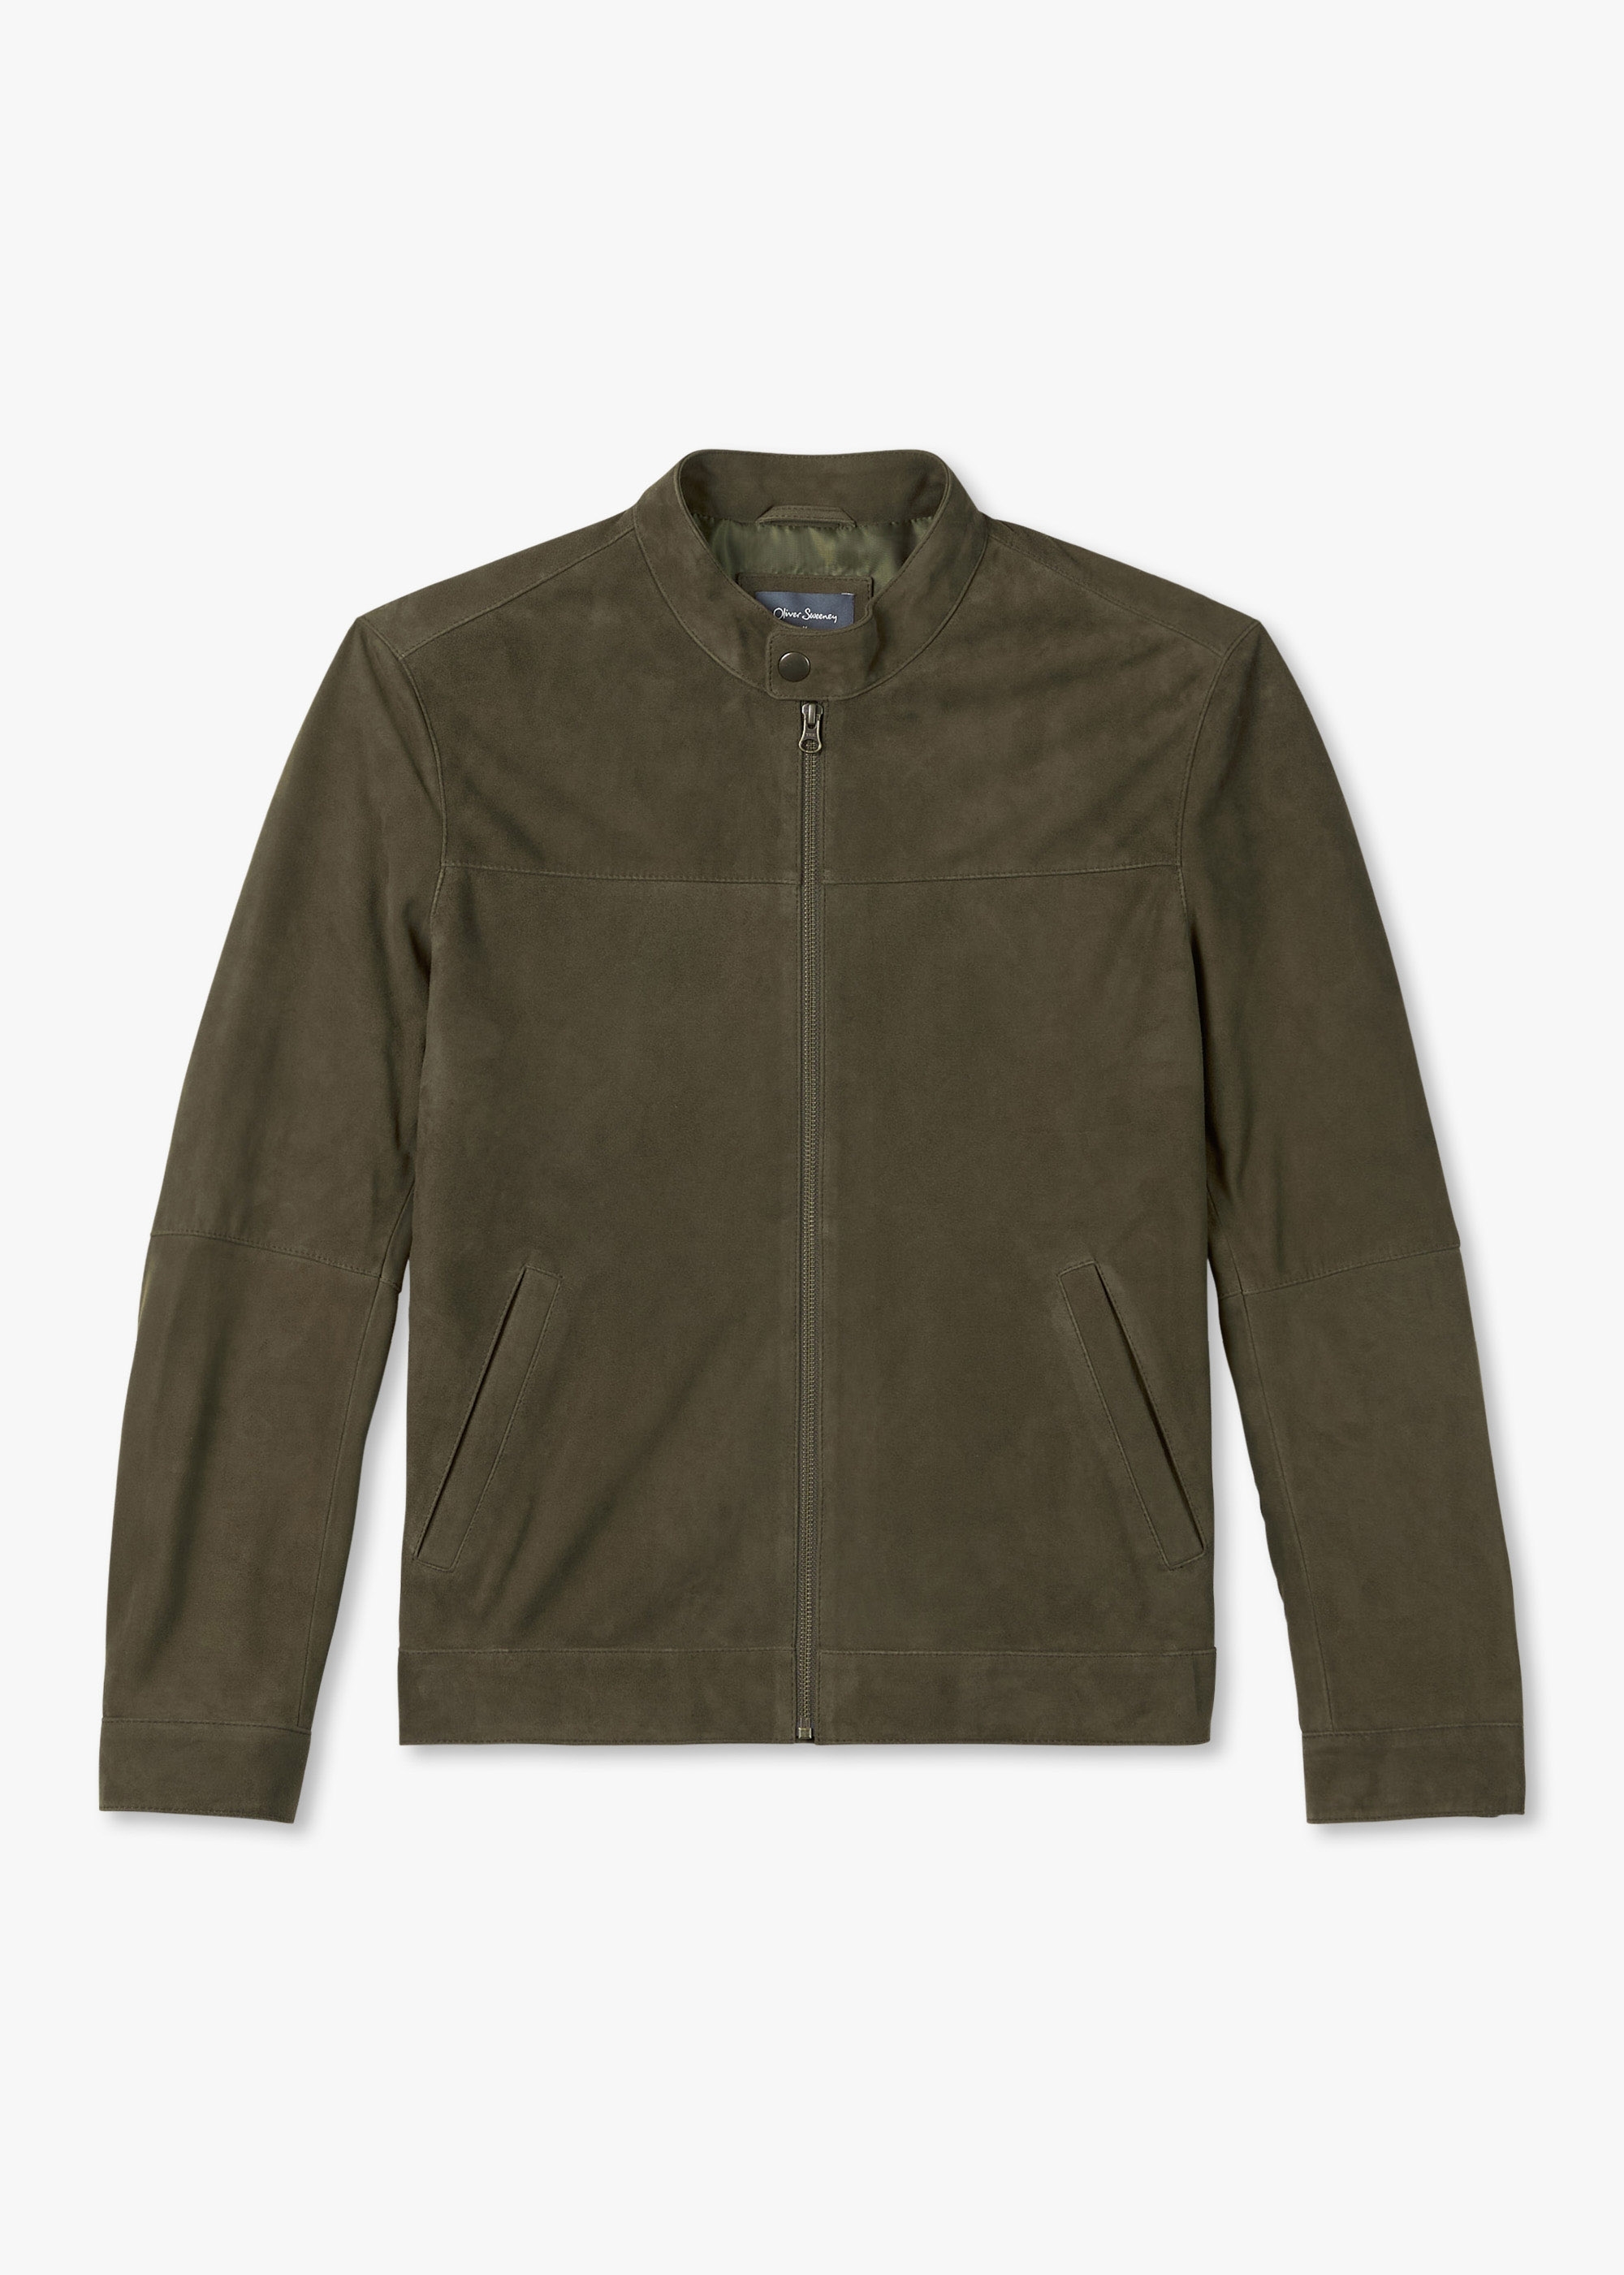 Oliver Sweeney Mens Dimson Casual Jacket In Olive